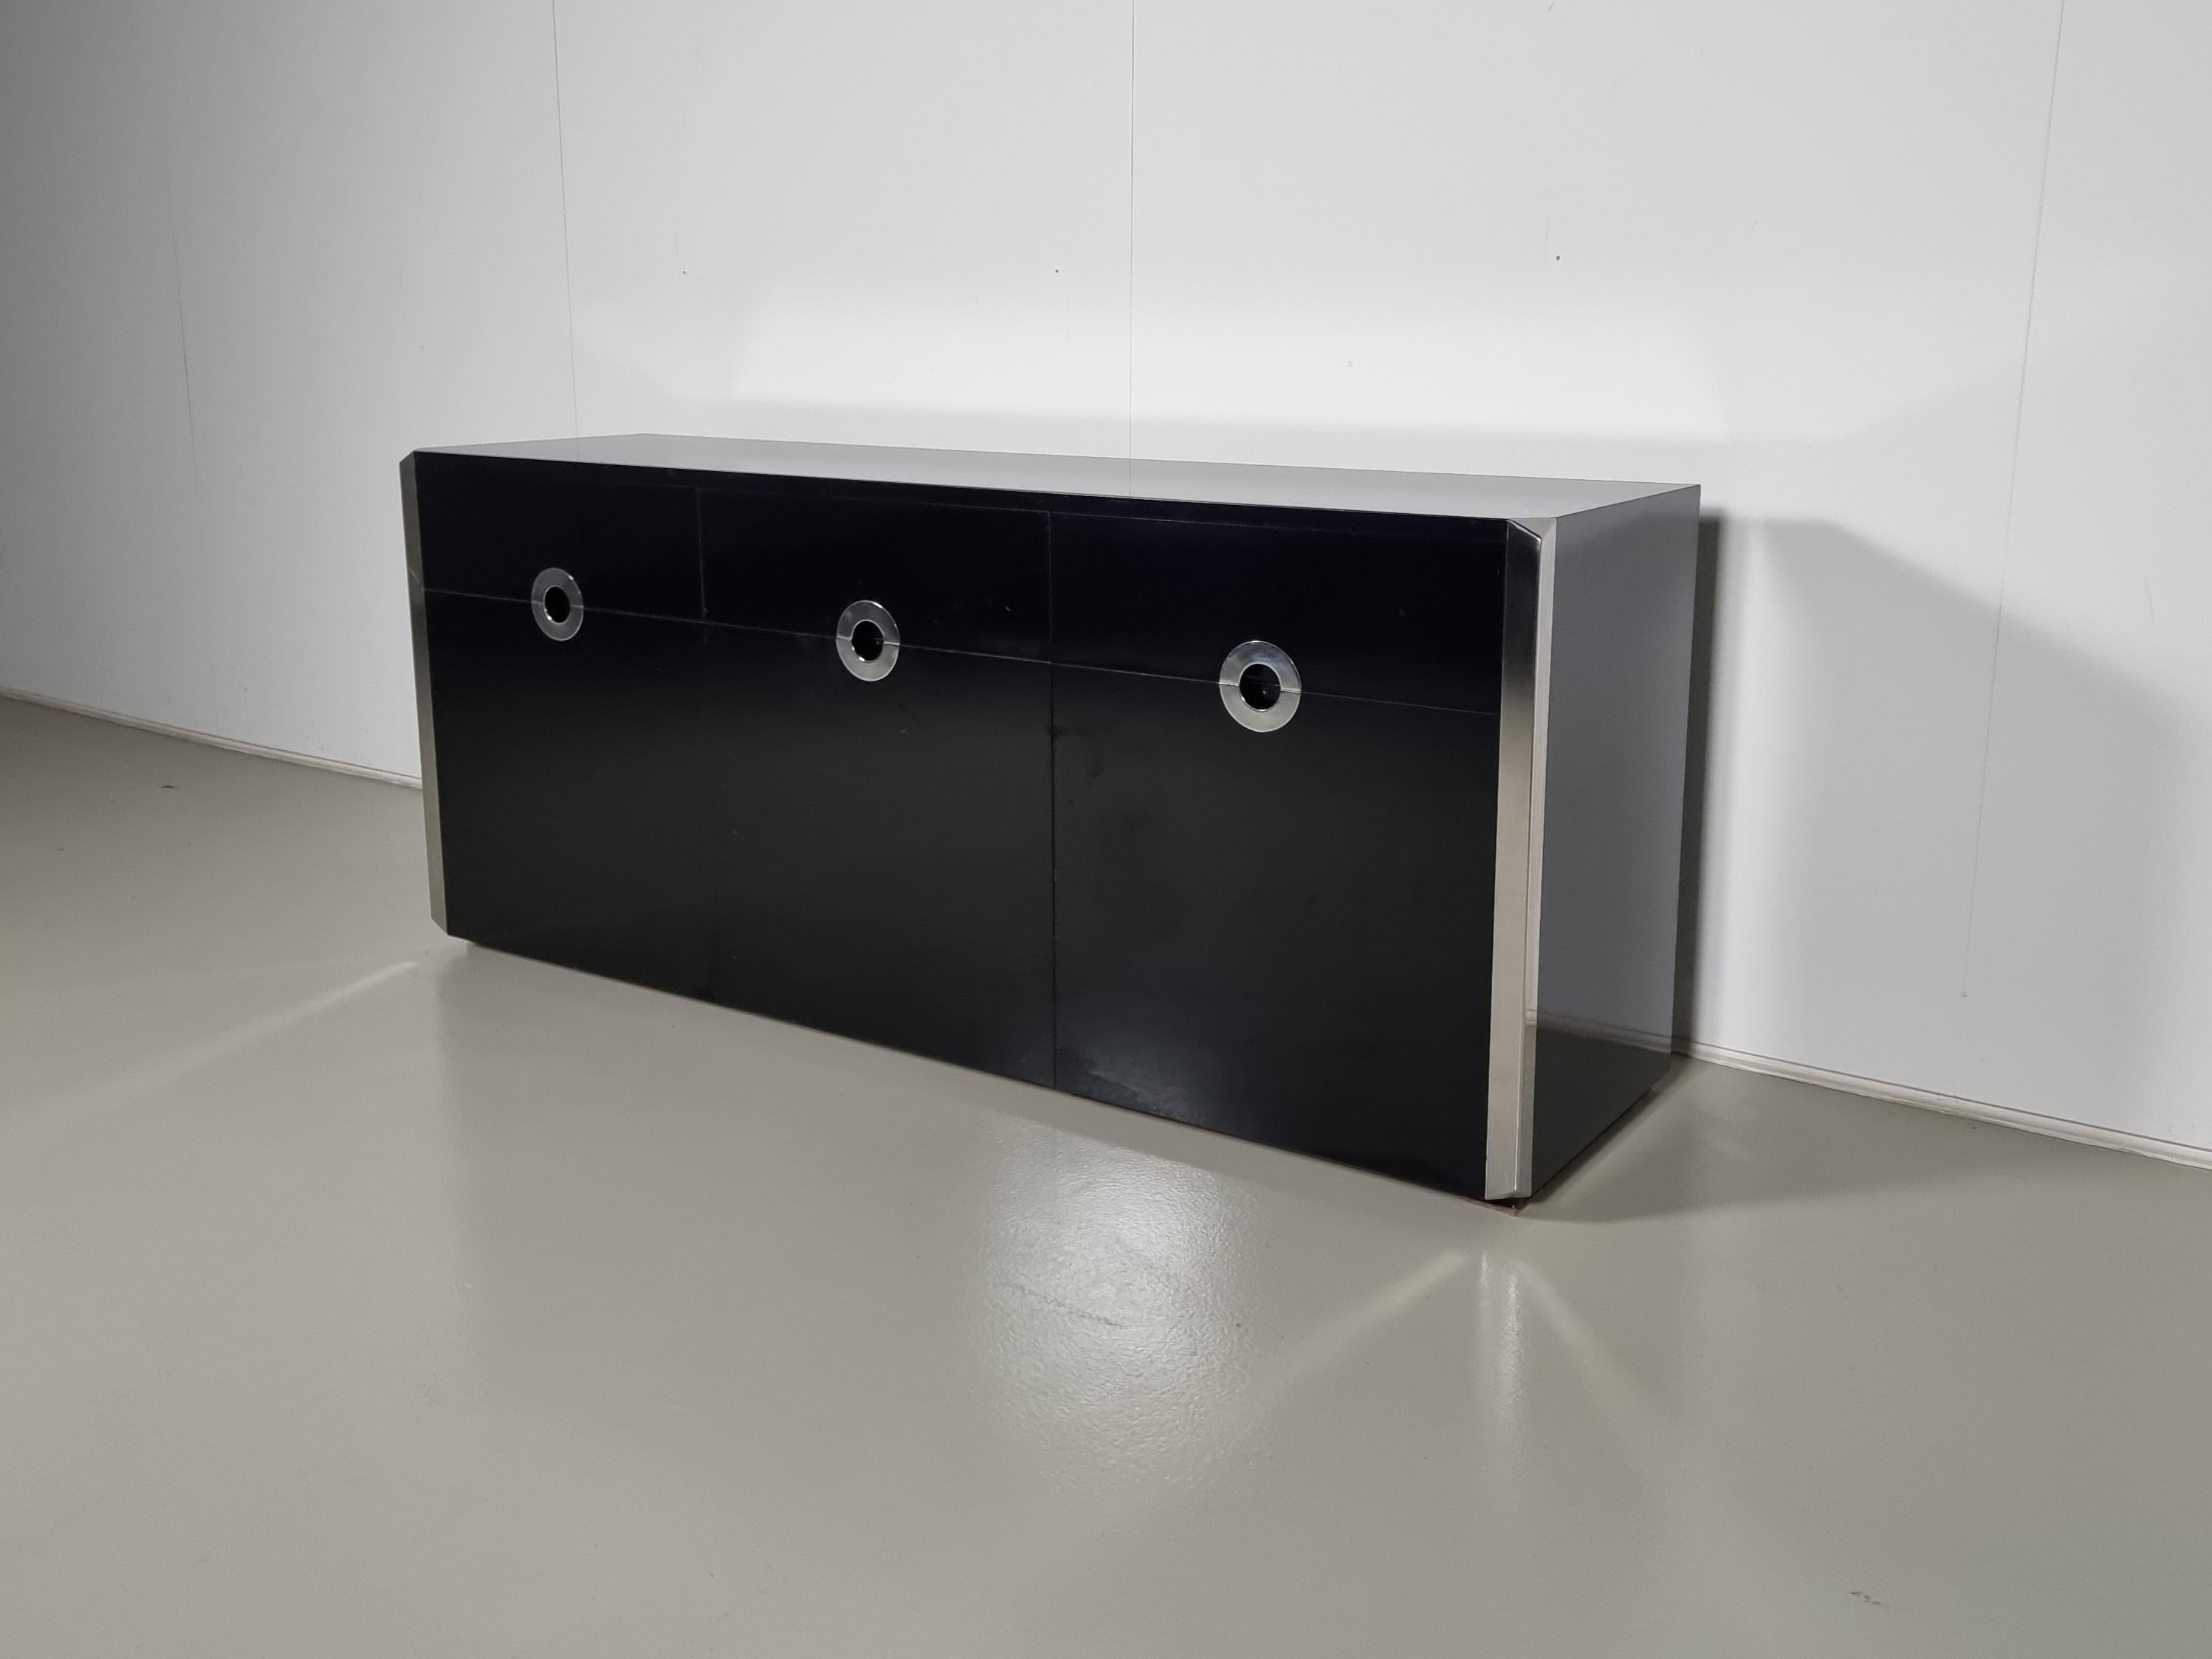 Elegant black sideboard made in black laminated wood and chromed steel edges and drawer pulls on the front. Designed by Willy Rizzo for Mario Sabot in Italy in 1974. It has two opening side doors, one center drop-down door, and three drawers. The